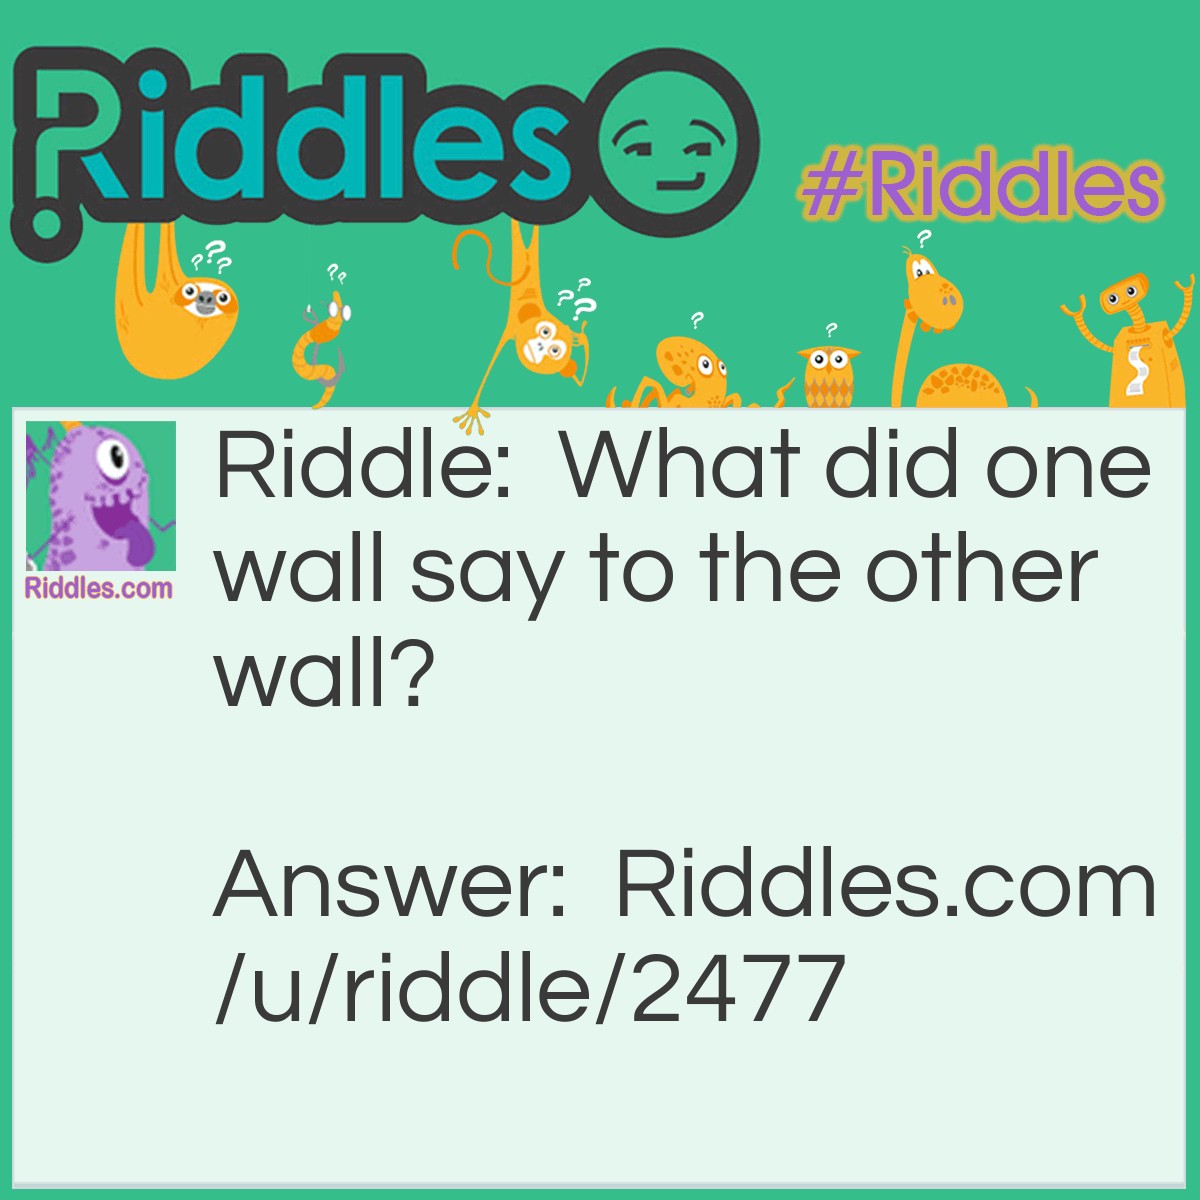 Riddle: What did one wall say to the other wall? Answer: I'll meet you at the corner.